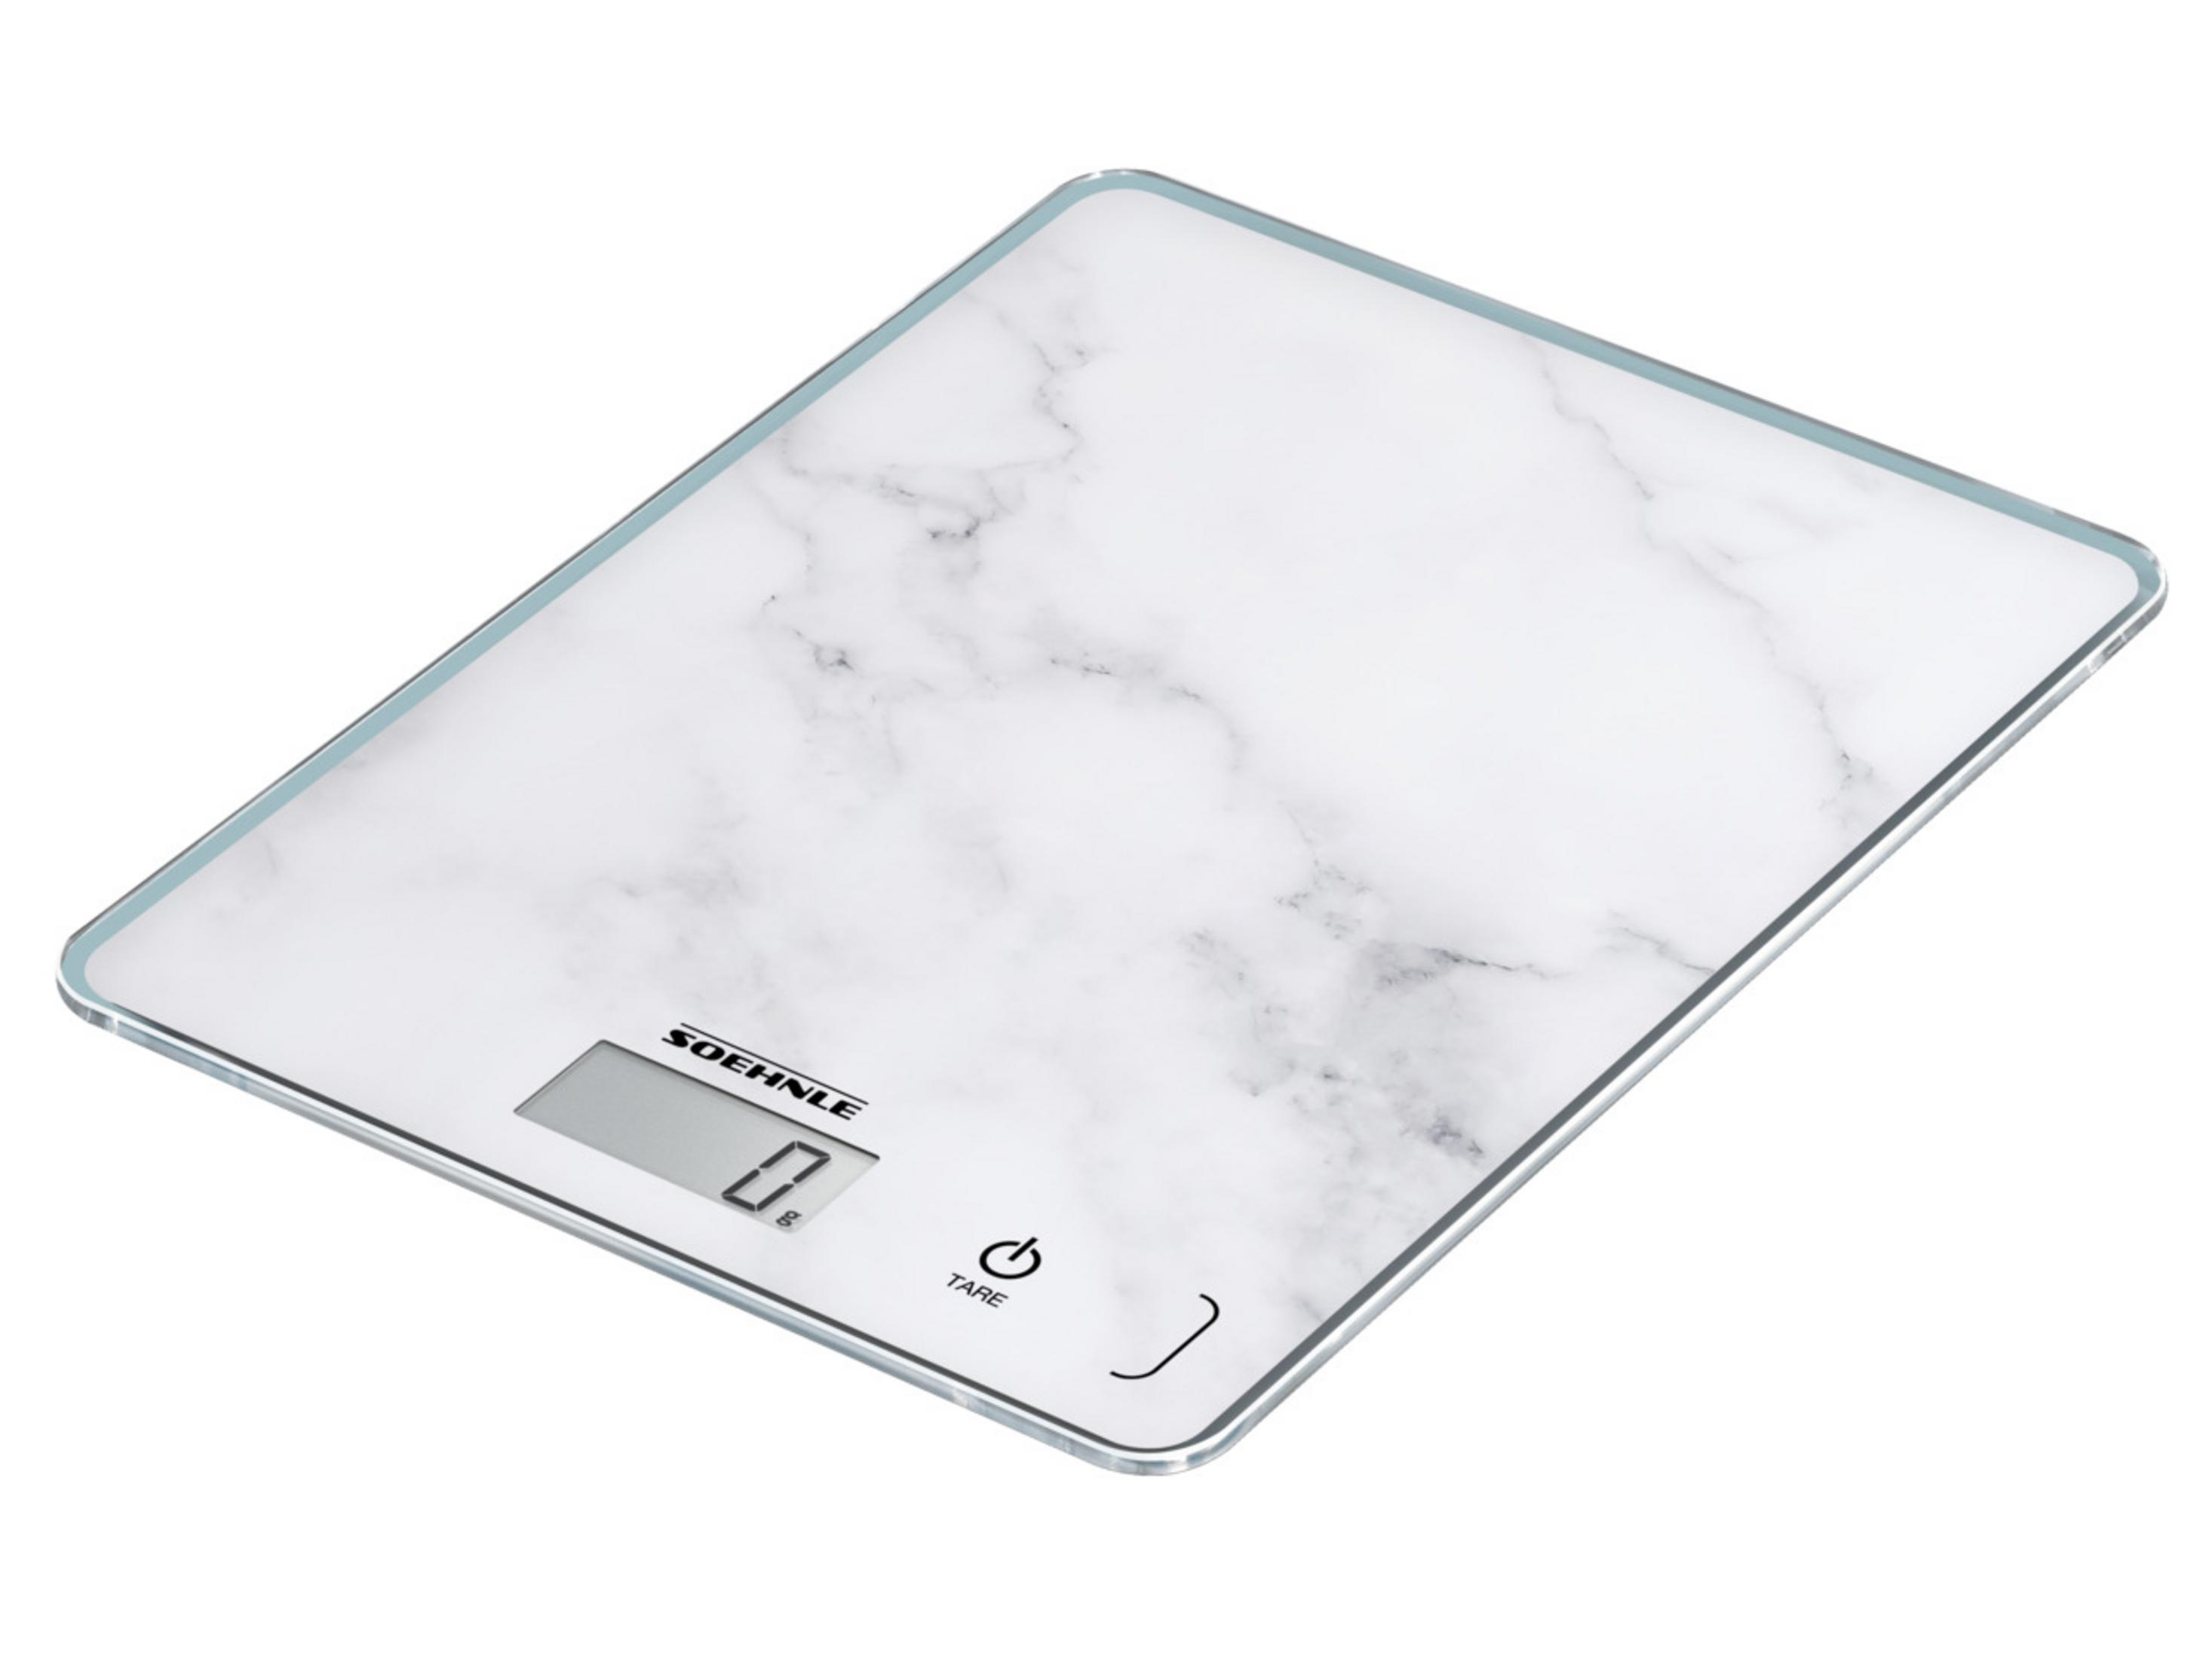 61516 Küchenwaage COMPACT 5 (Max. kg 300 PAGE Tragkraft: SOEHNLE MARBLE